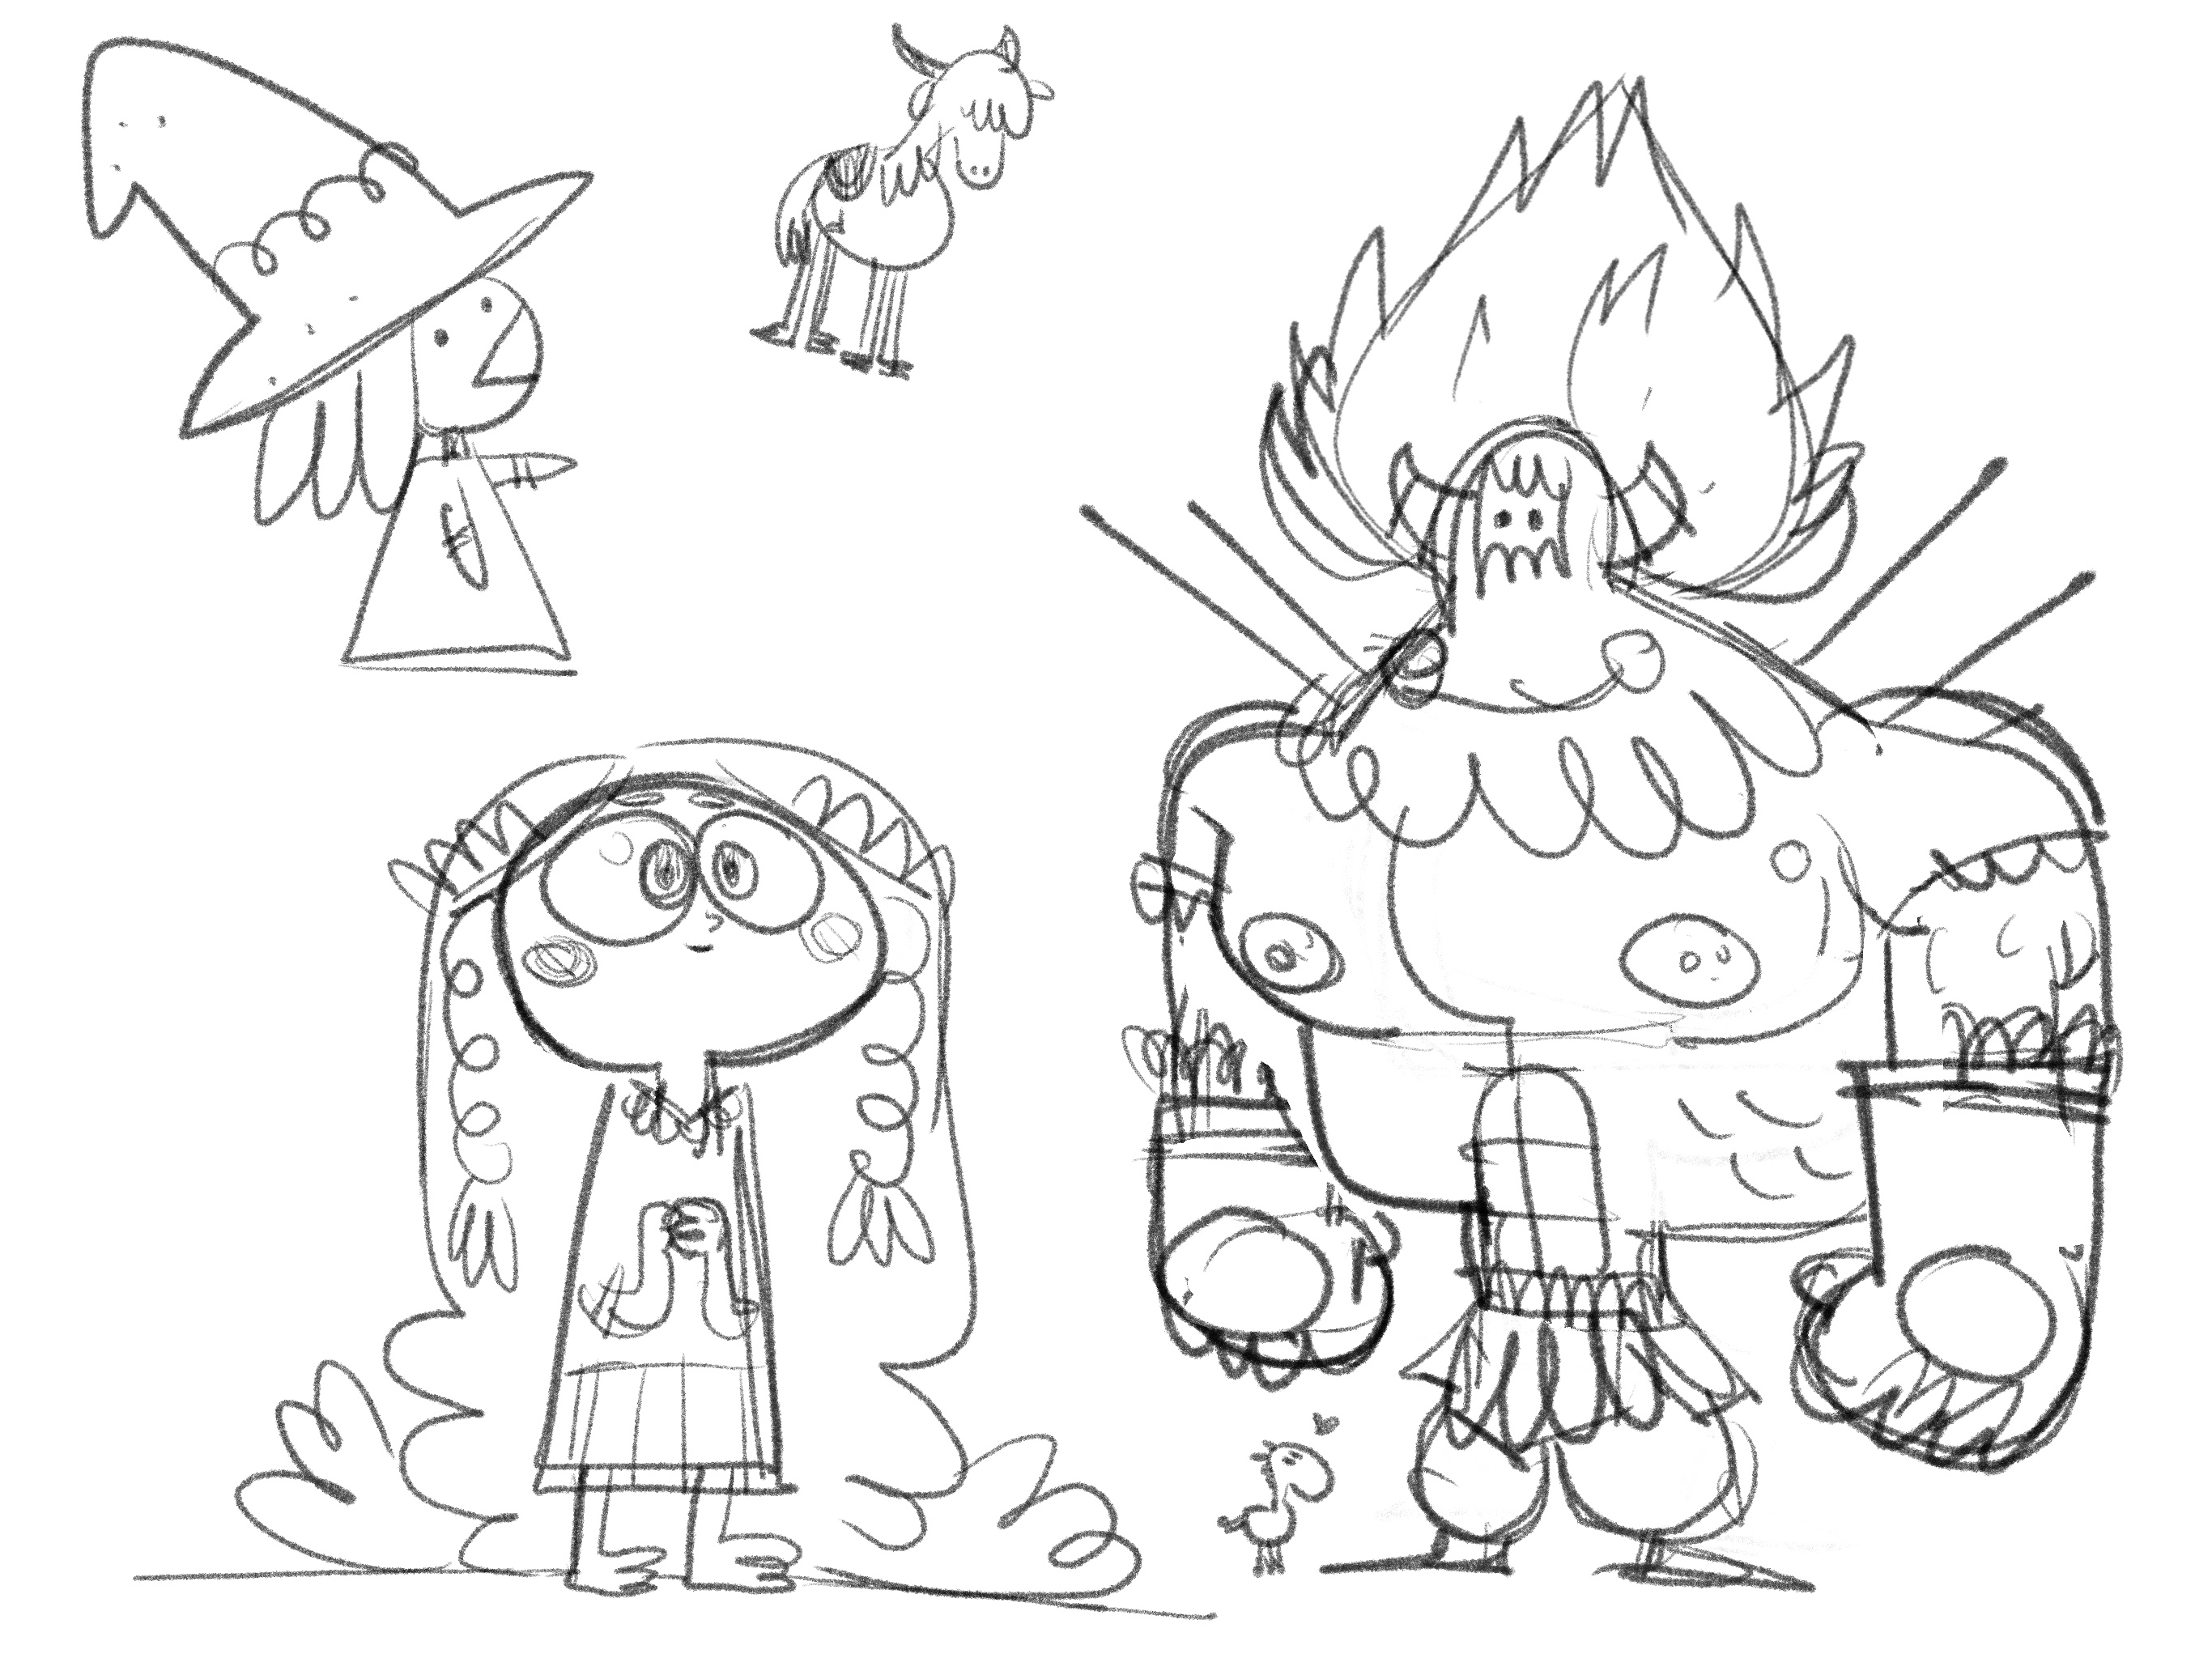 Sketches of characters from Elden Ring Shadow of the Erdtree in cartoon style